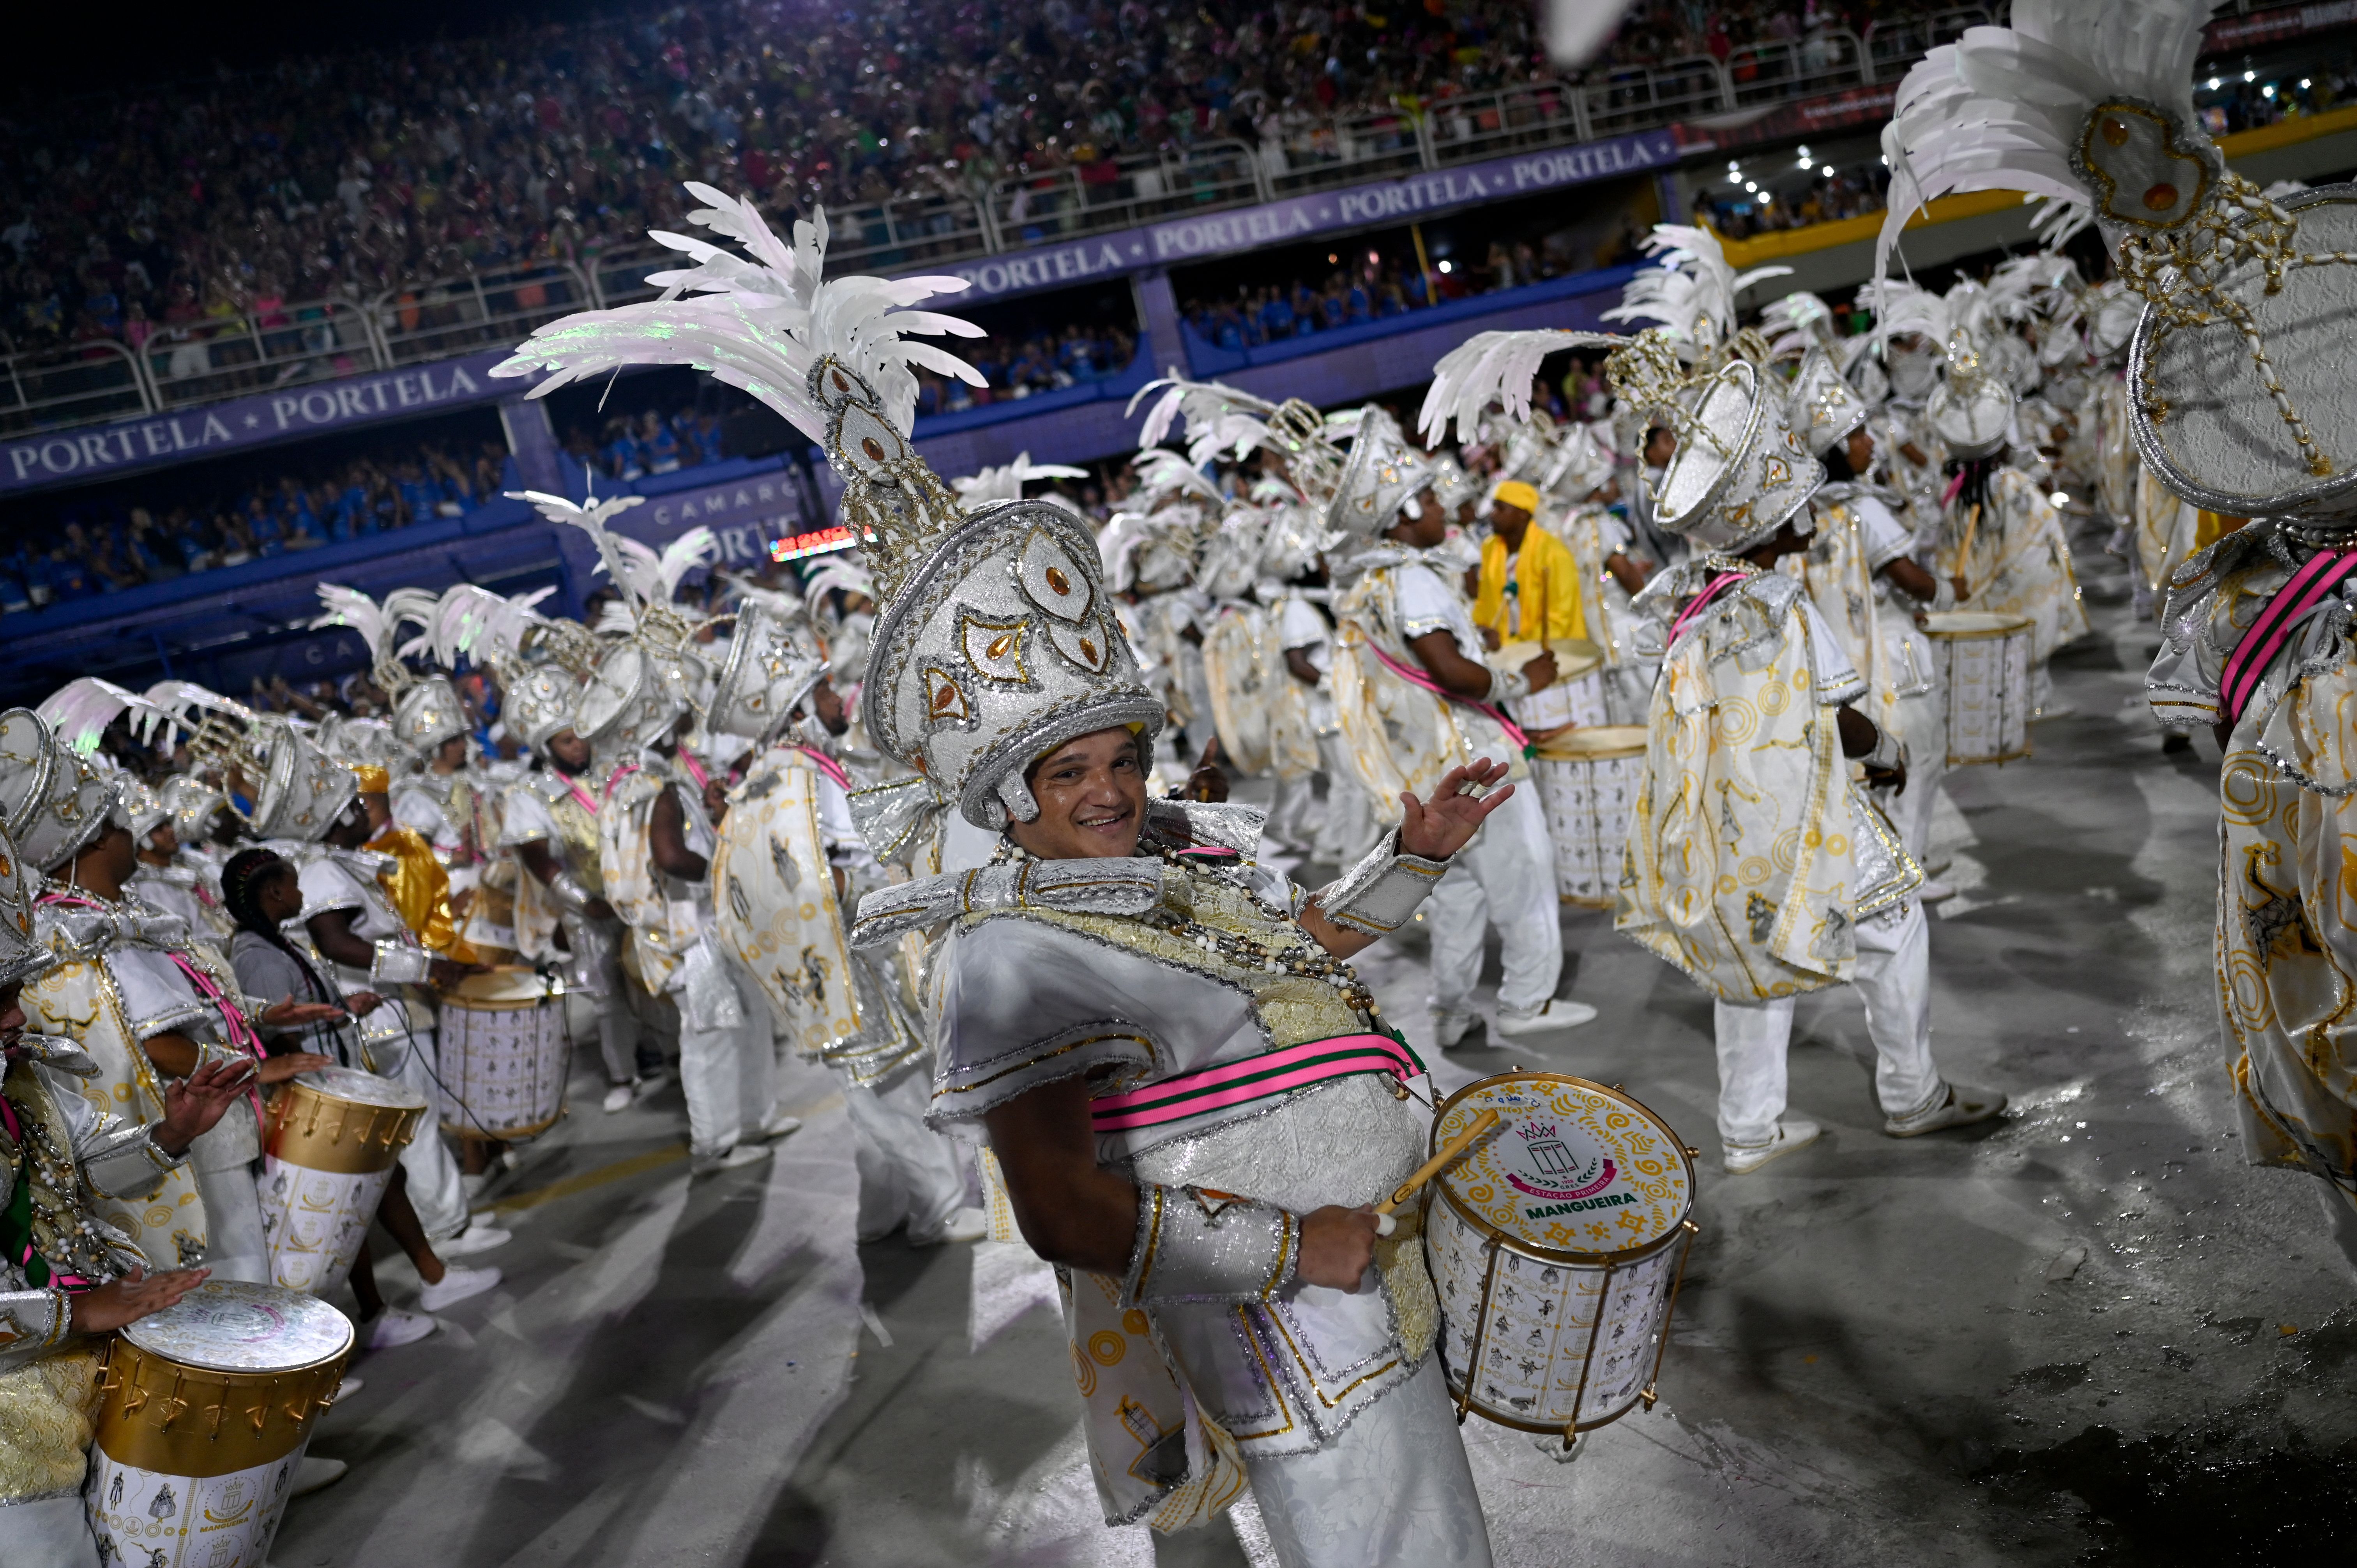 A drumline in shiny and encrusted white outfits play their drums during Carnival in Brazil